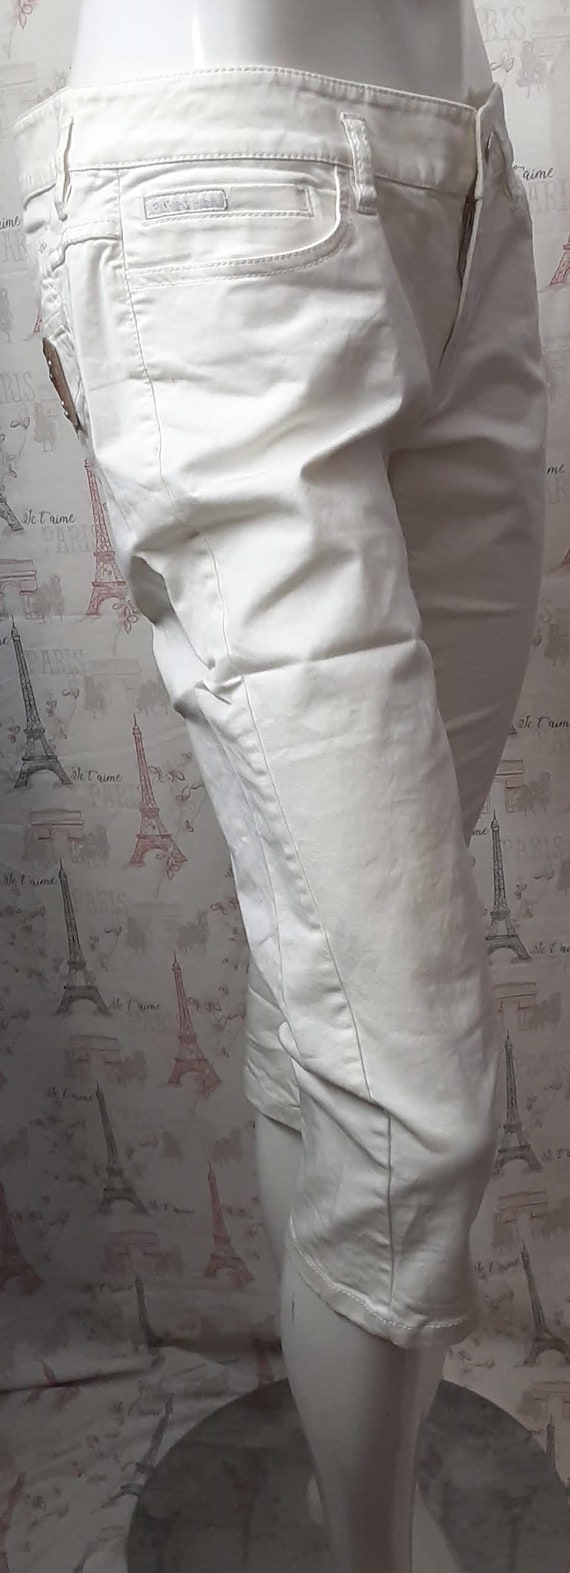 DOLCE and GABBANA Vintage White Jeans Capris - image 6